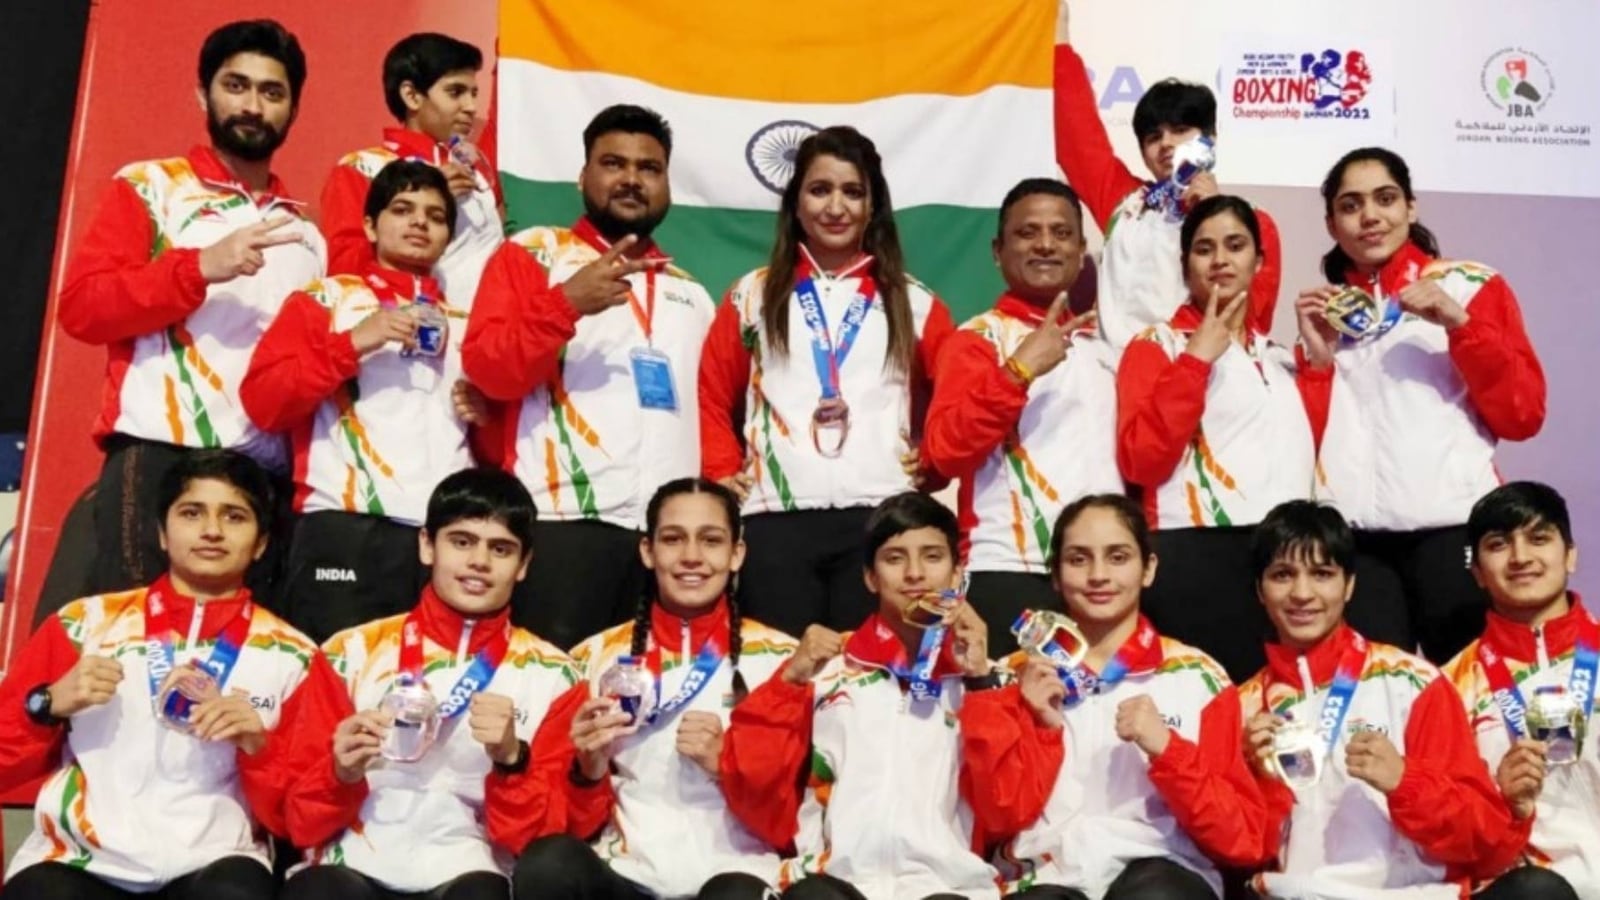 Young Indian boxers packing a powerful punch - Hindustan Times